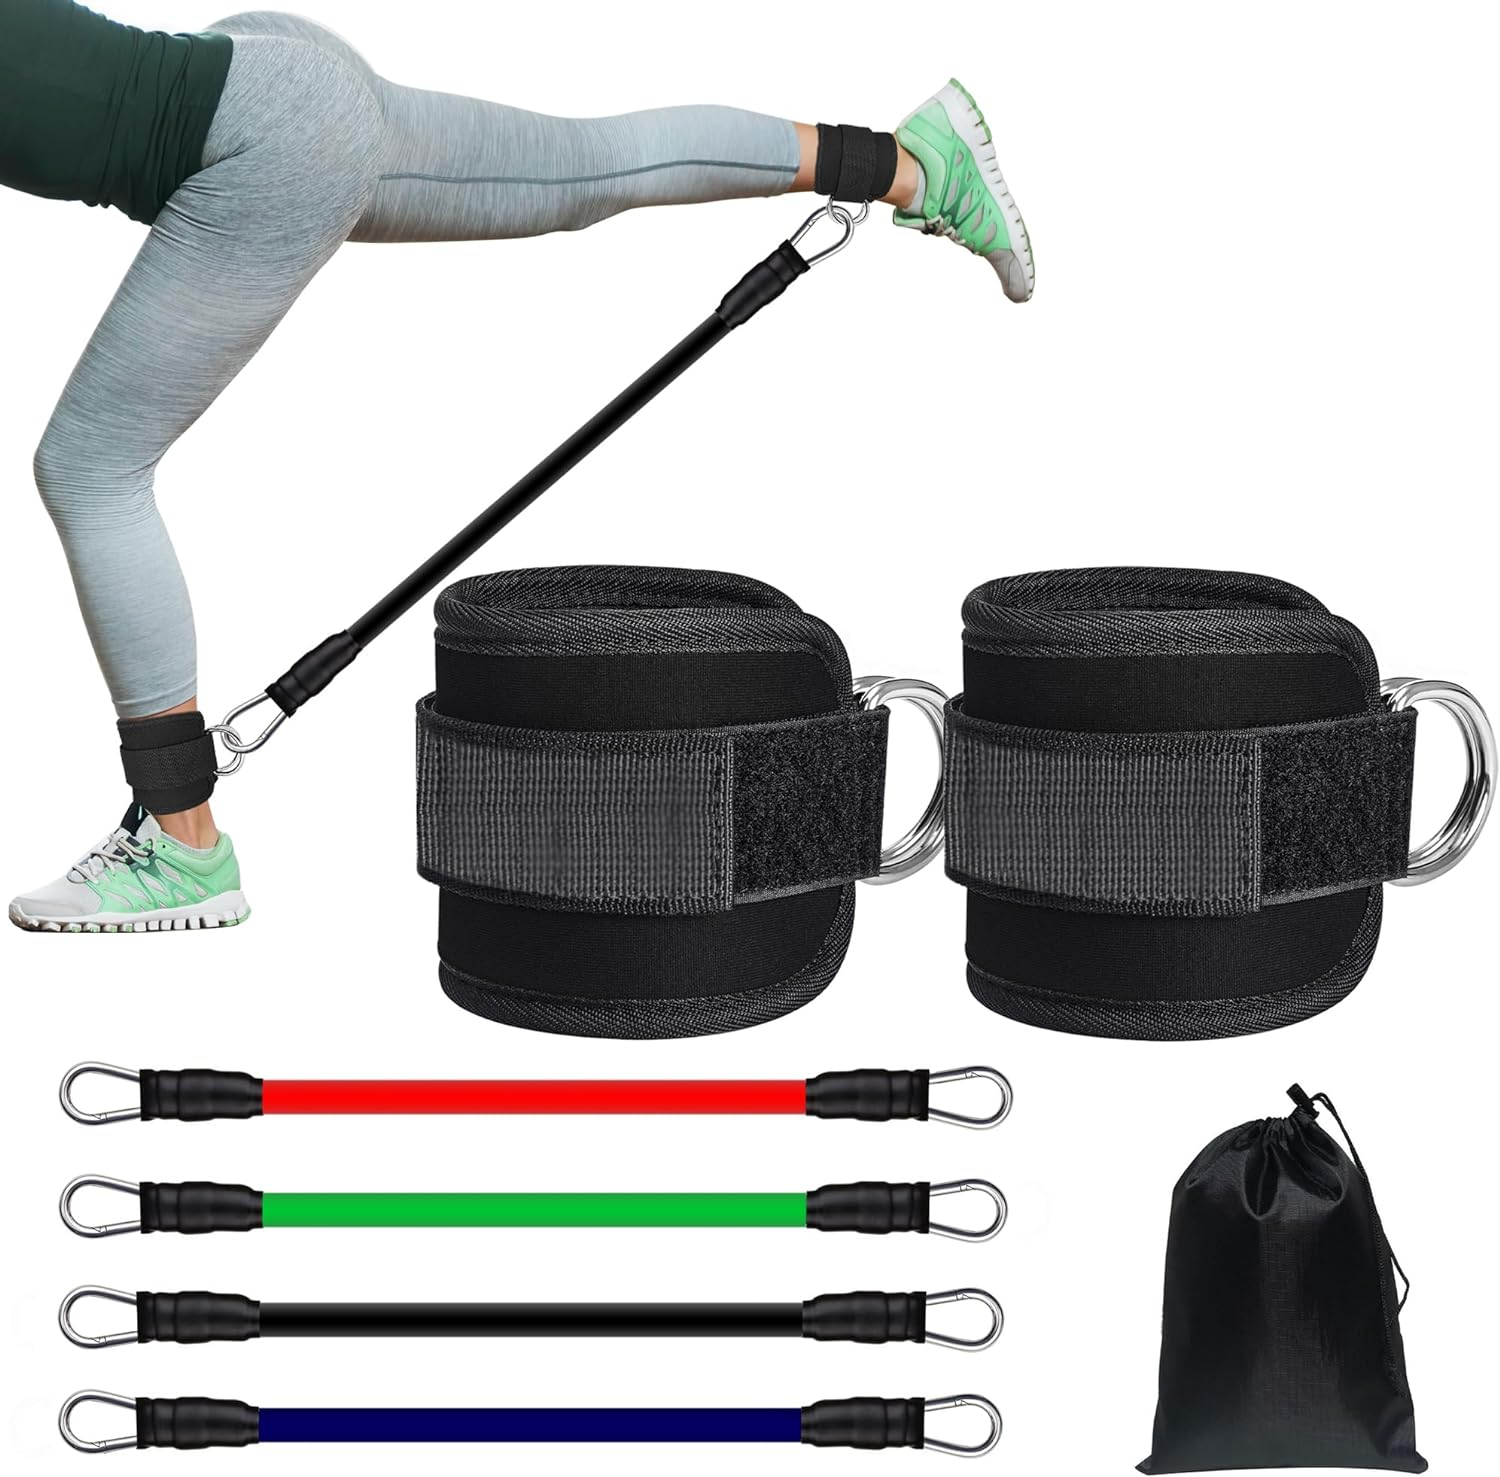 Anemeeoke Ankle Resistance Bands with Cuffs, Glutes Workout Equipment, 10 20 30 40LB Different Pound Resistance Bands, Ankle Bands for Working Out, Butt Exercise for Women Legs and Glutes